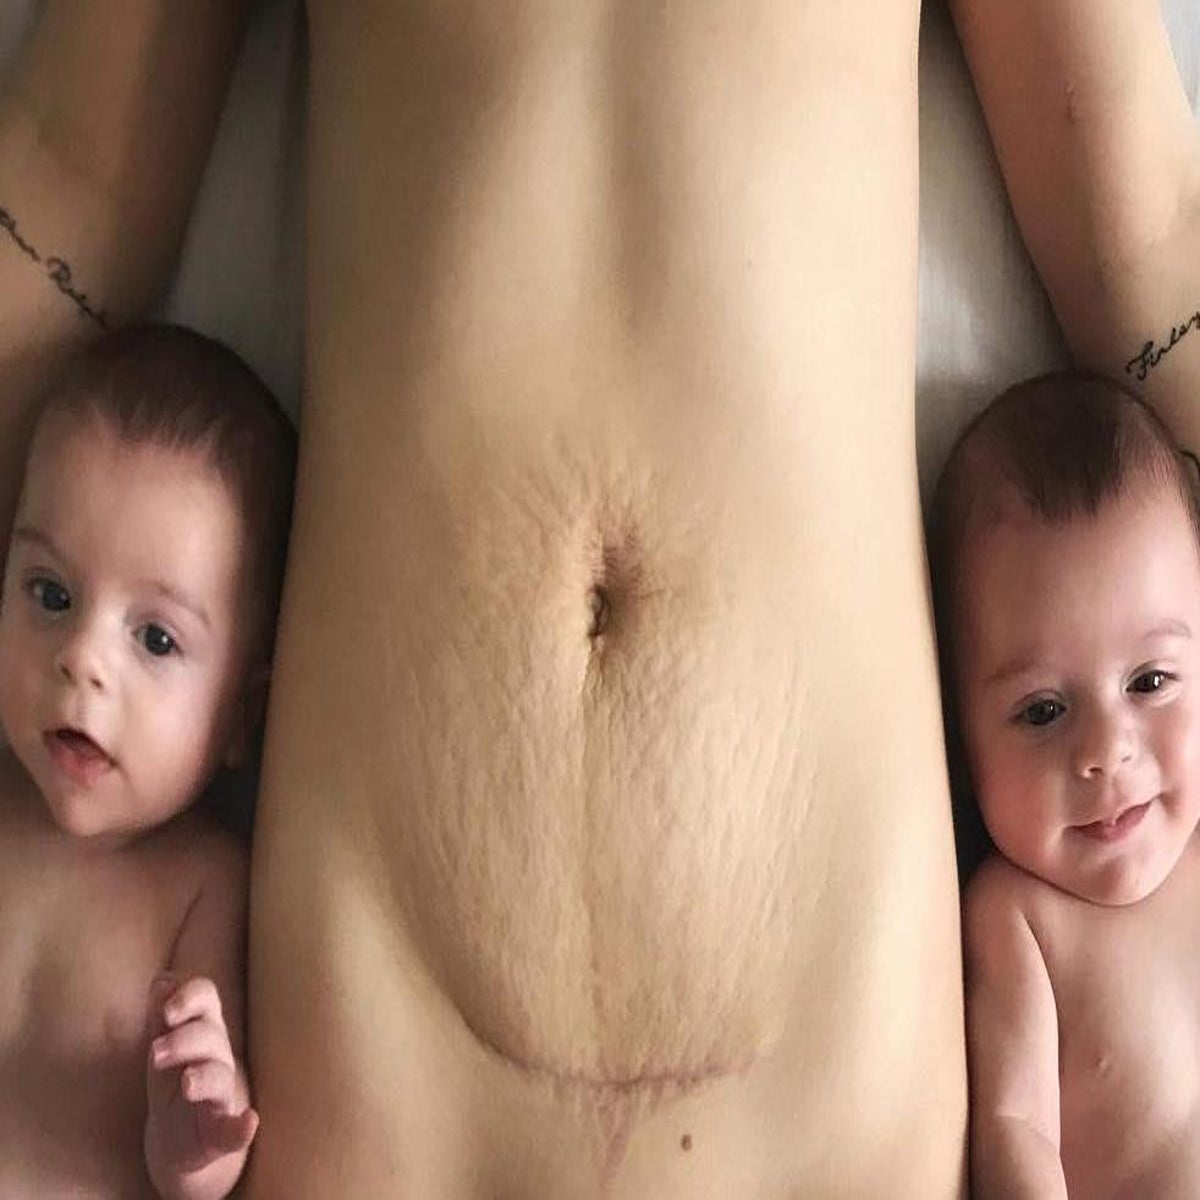 Mother urges women not to feel ashamed of post-pregnancy bodies in